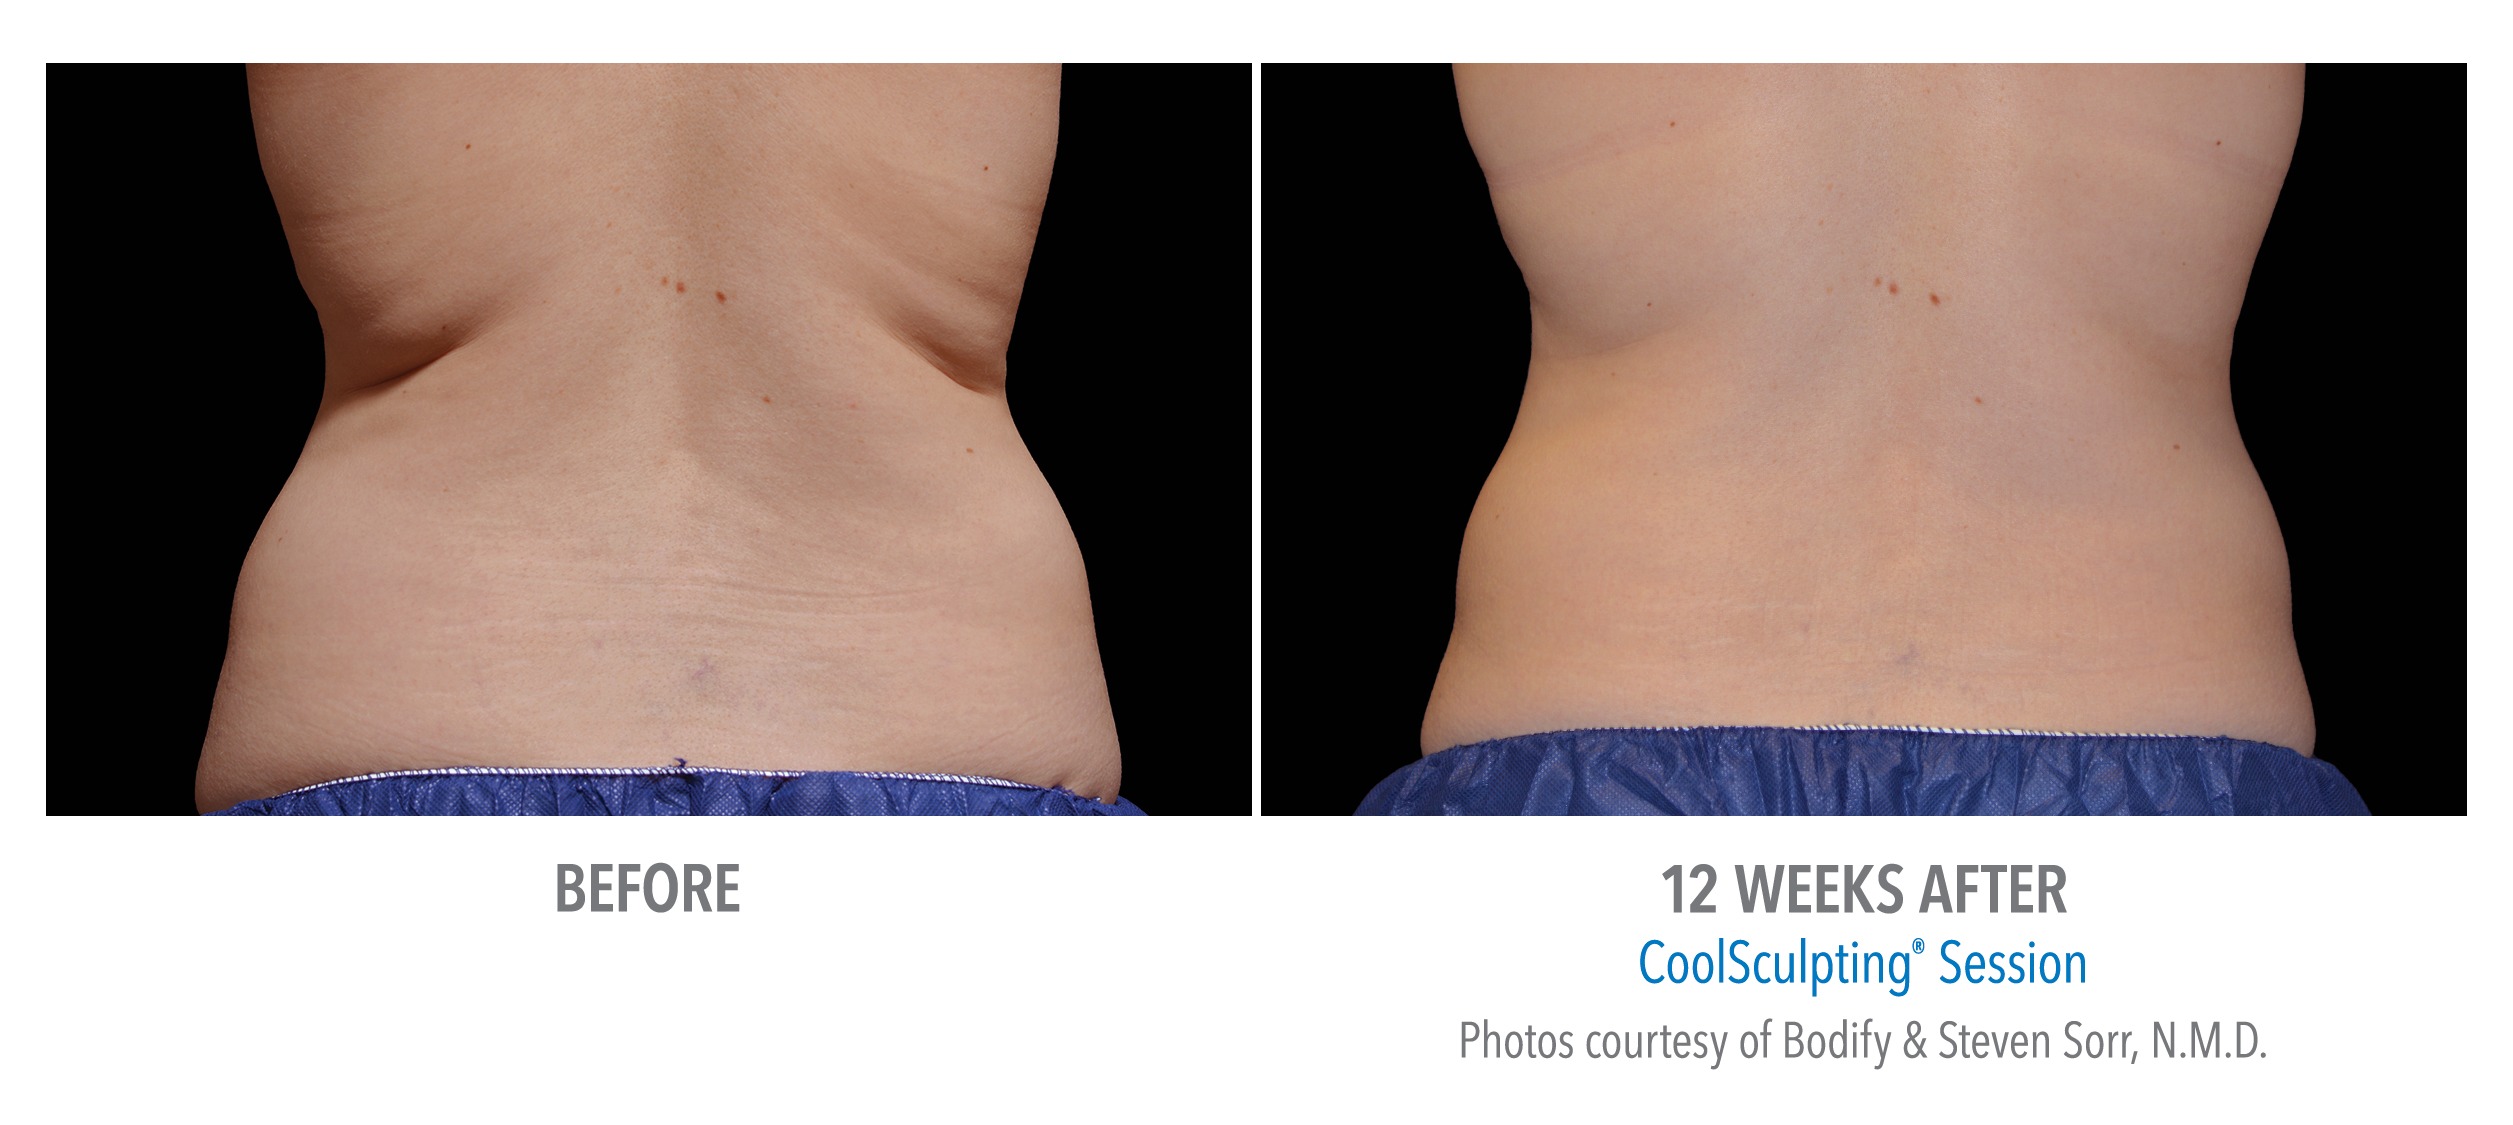 Coolsculpting shows positive results in 12 weeks or less!